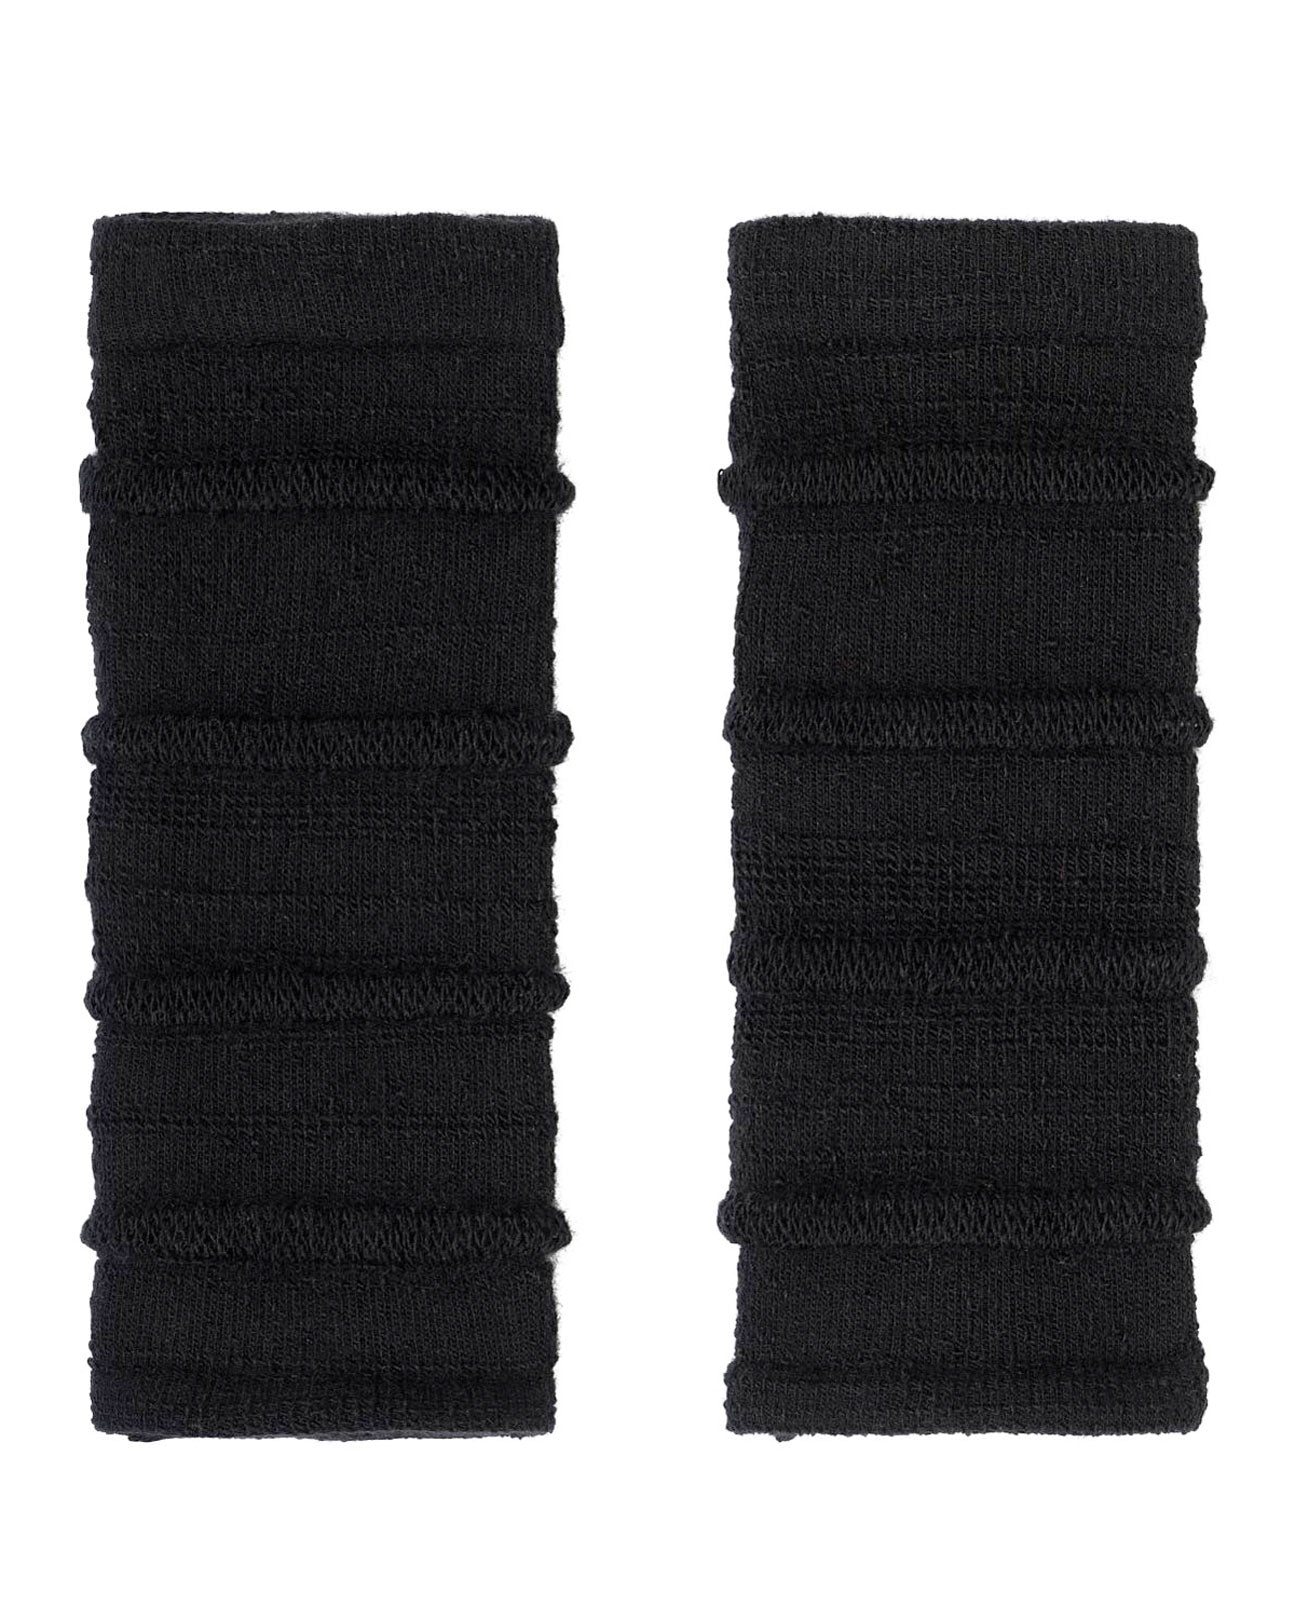 ELLS Arm Warmers in Black available at Lahn.shop